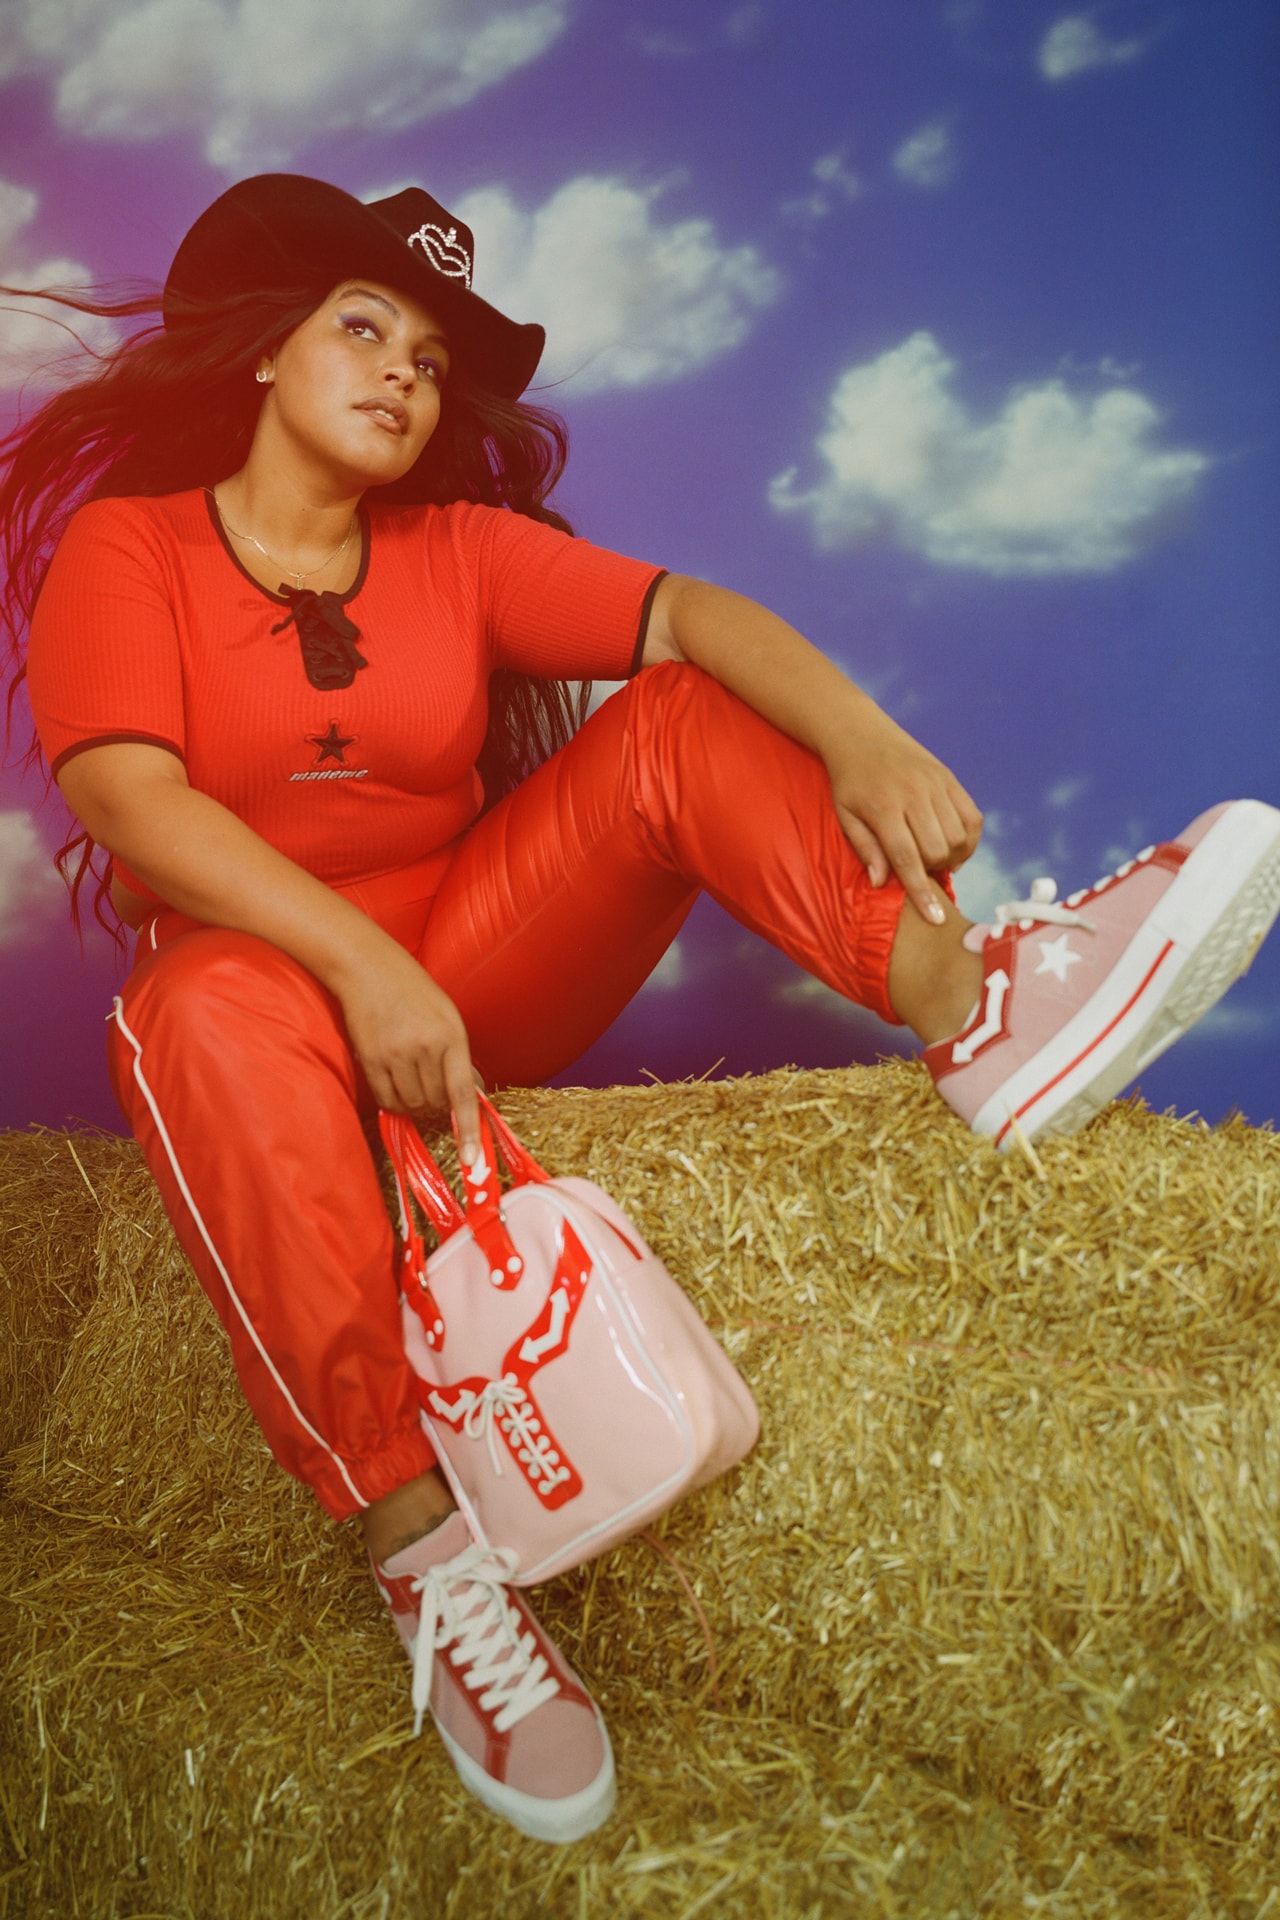 MadeMe x Converse Collaboration Paloma Elsesser One Star Pink Shirt Pants Red One Star Mini Bag Campaign